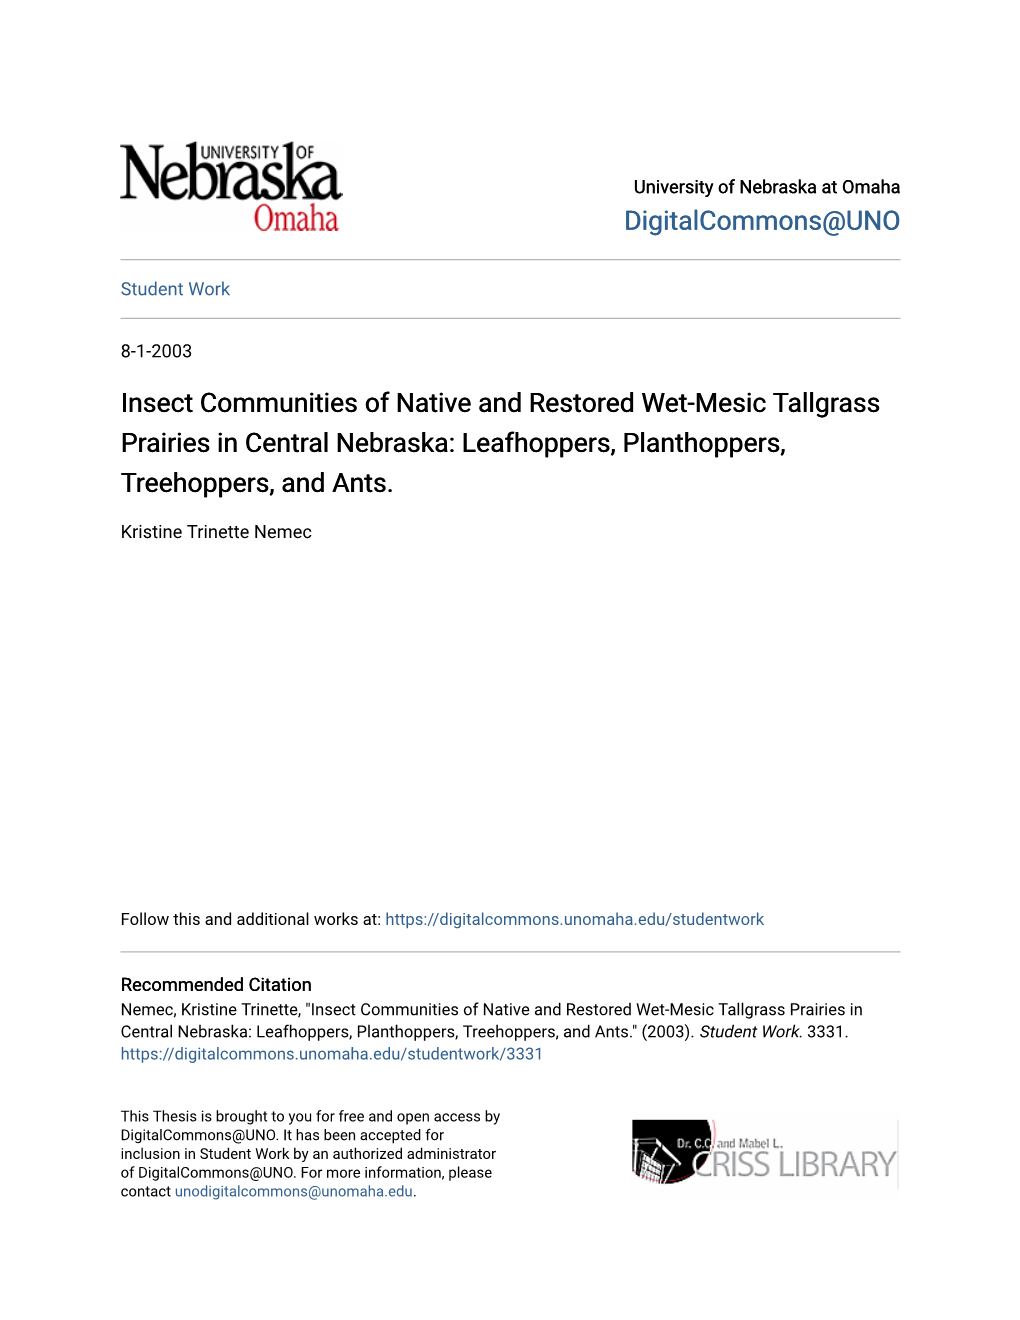 Insect Communities of Native and Restored Wet-Mesic Tallgrass Prairies in Central Nebraska: Leafhoppers, Planthoppers, Treehoppers, and Ants